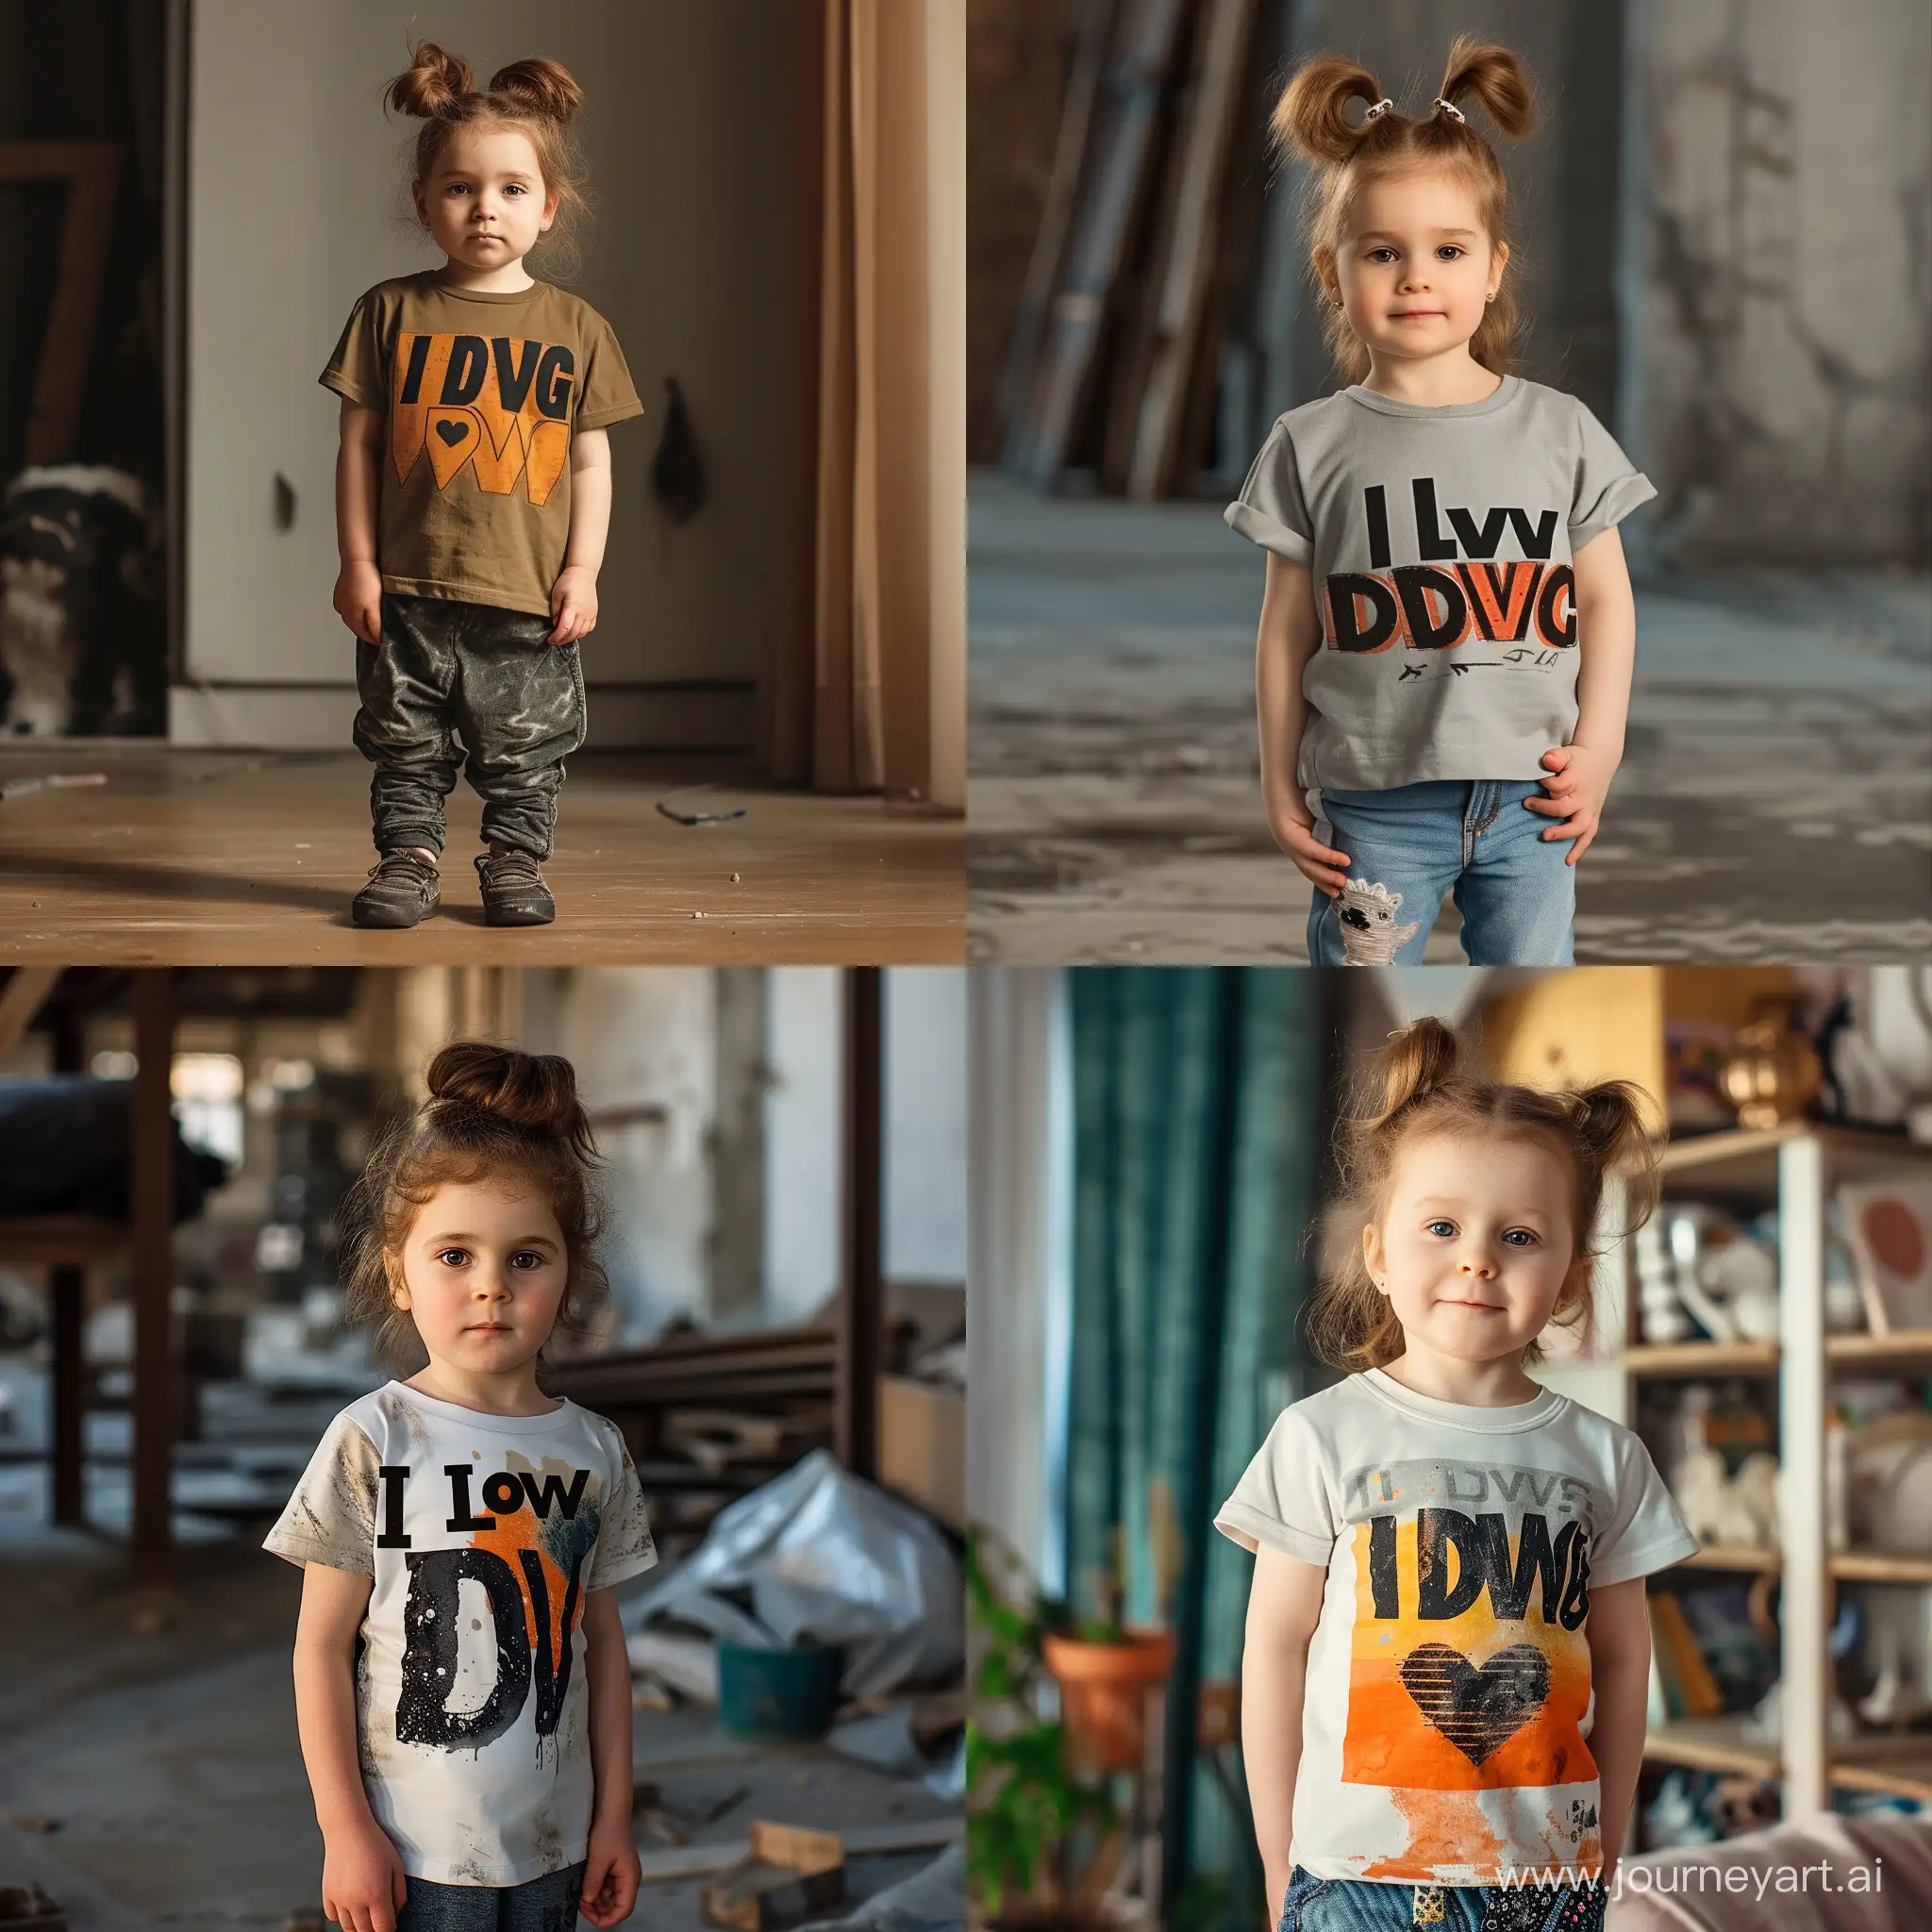 Adorable-Girl-Expressing-Love-for-DVACH-in-Printed-Tshirt